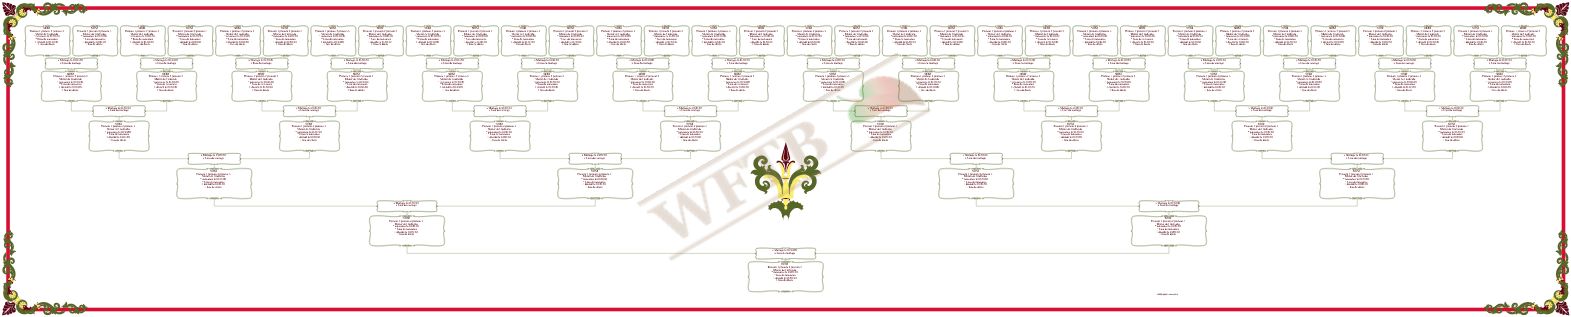 classic-family-tree-6-generations-template-2